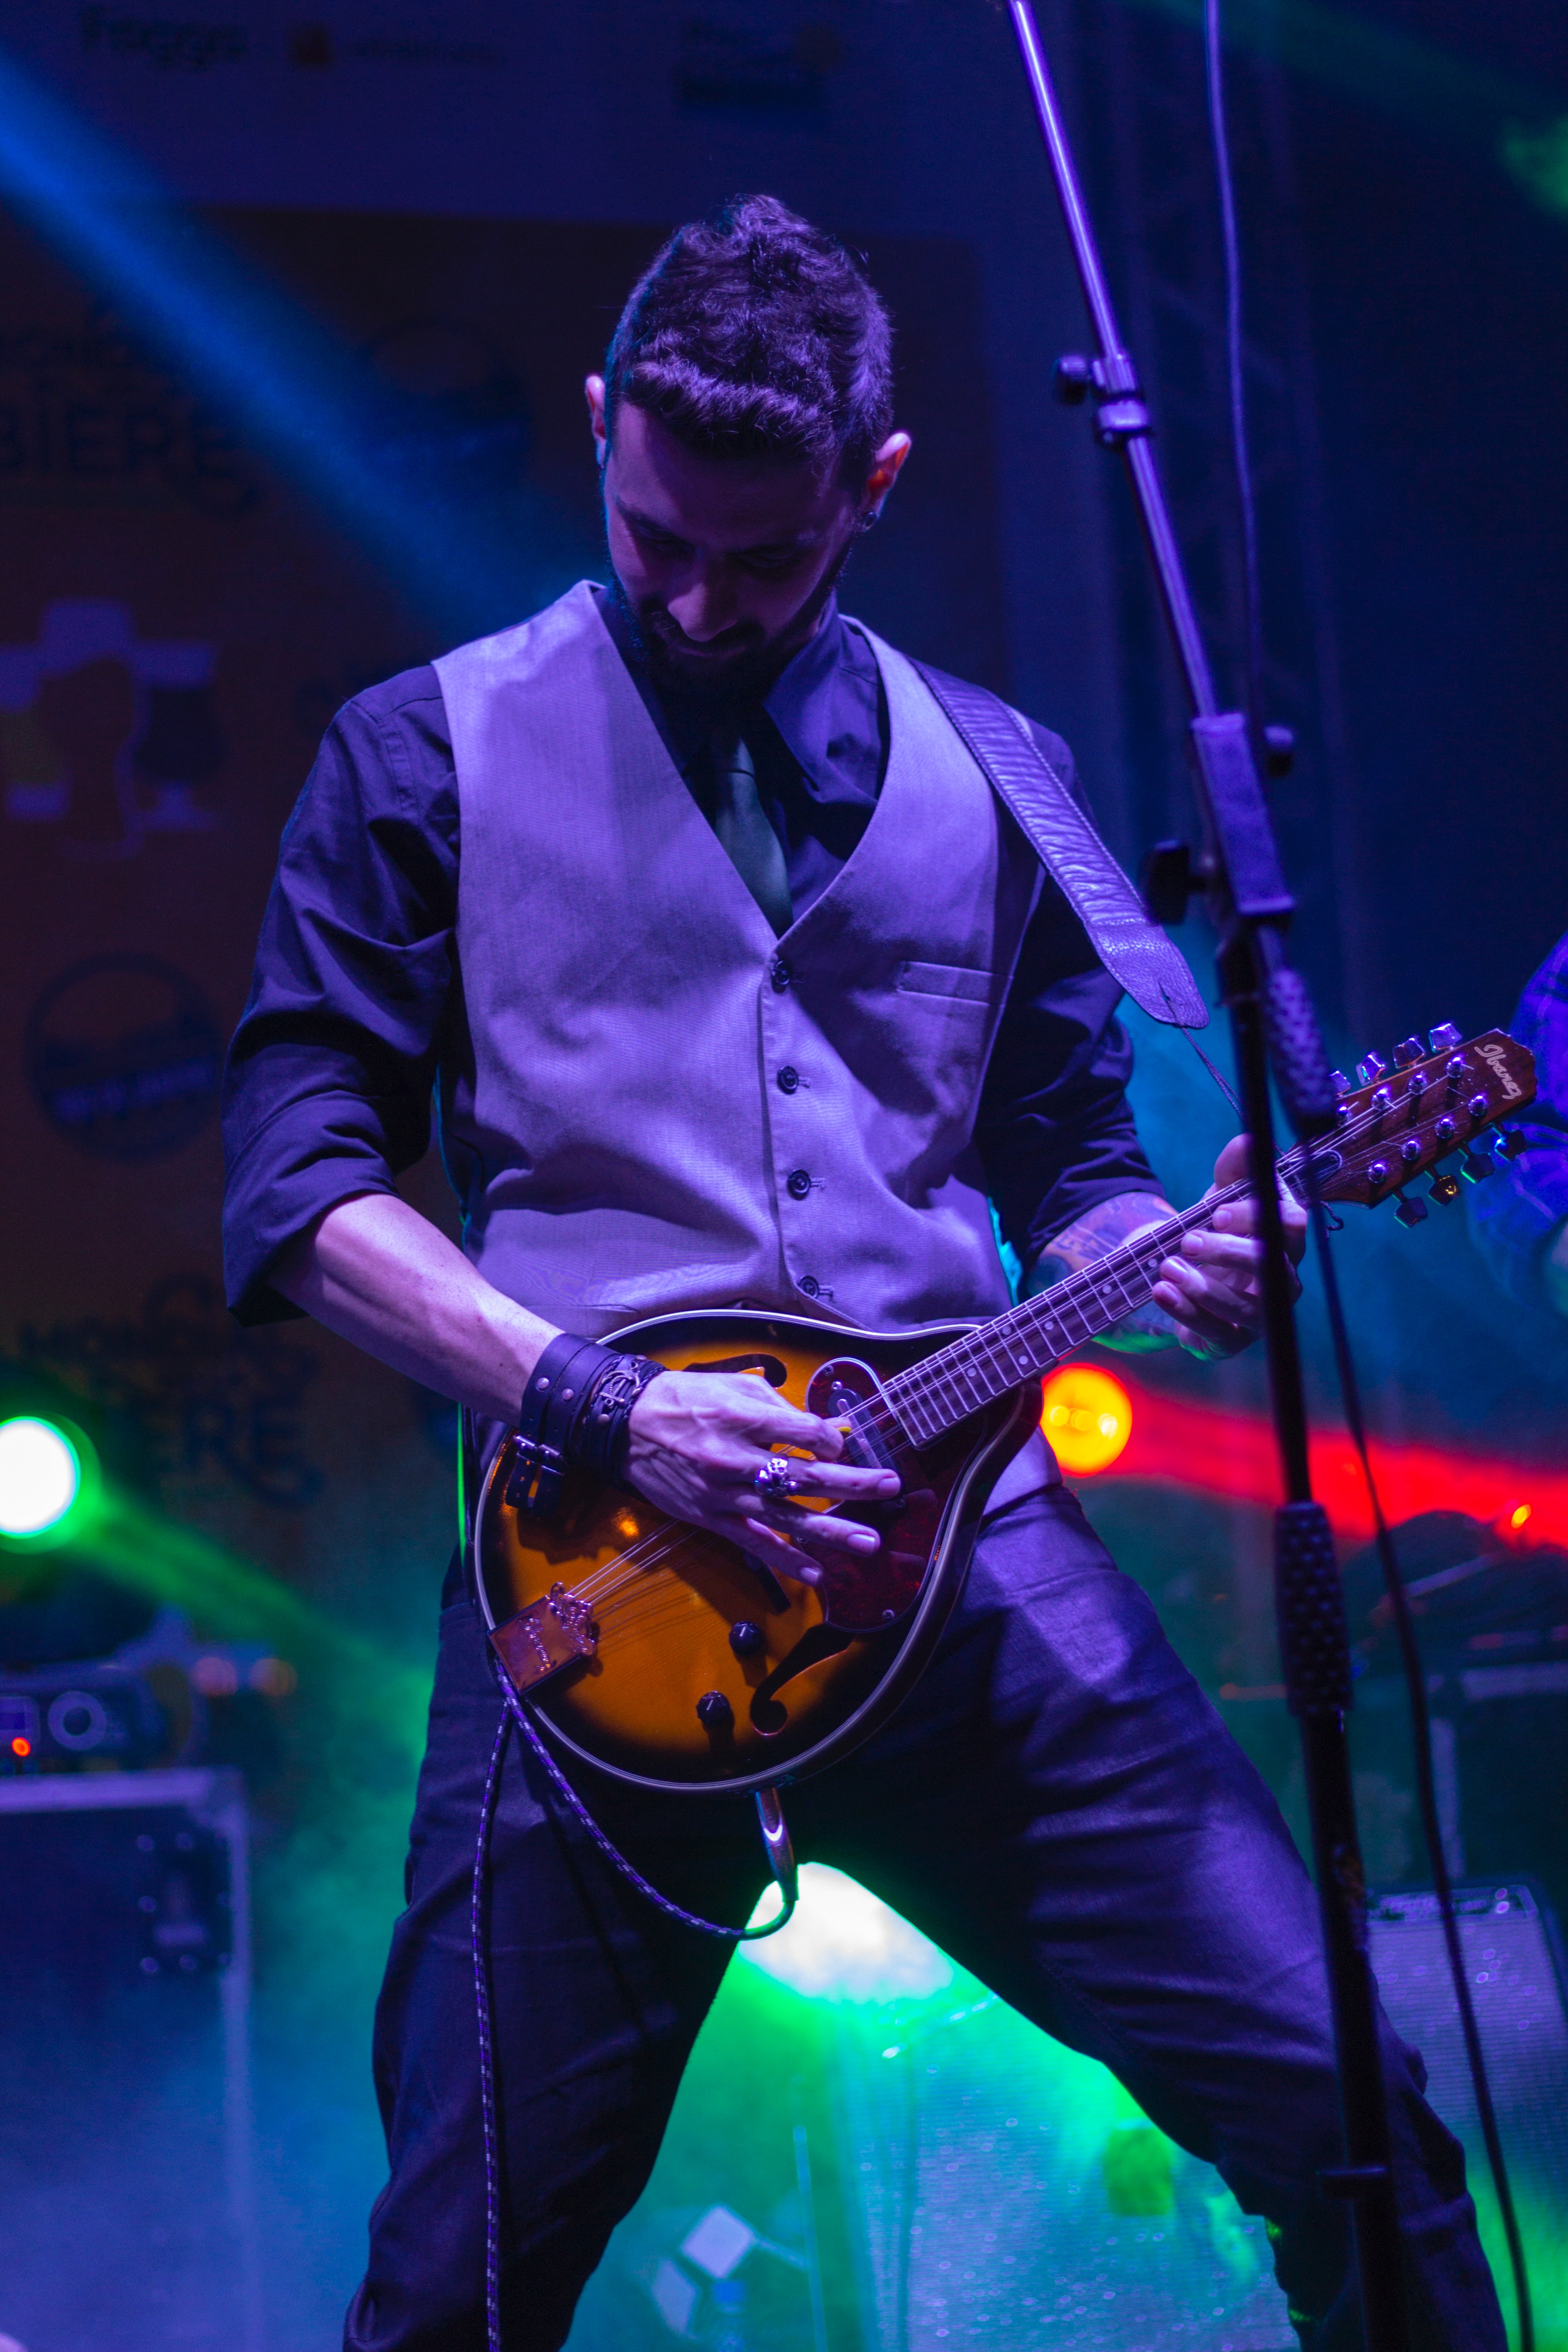 Guy playing mandolin on stage